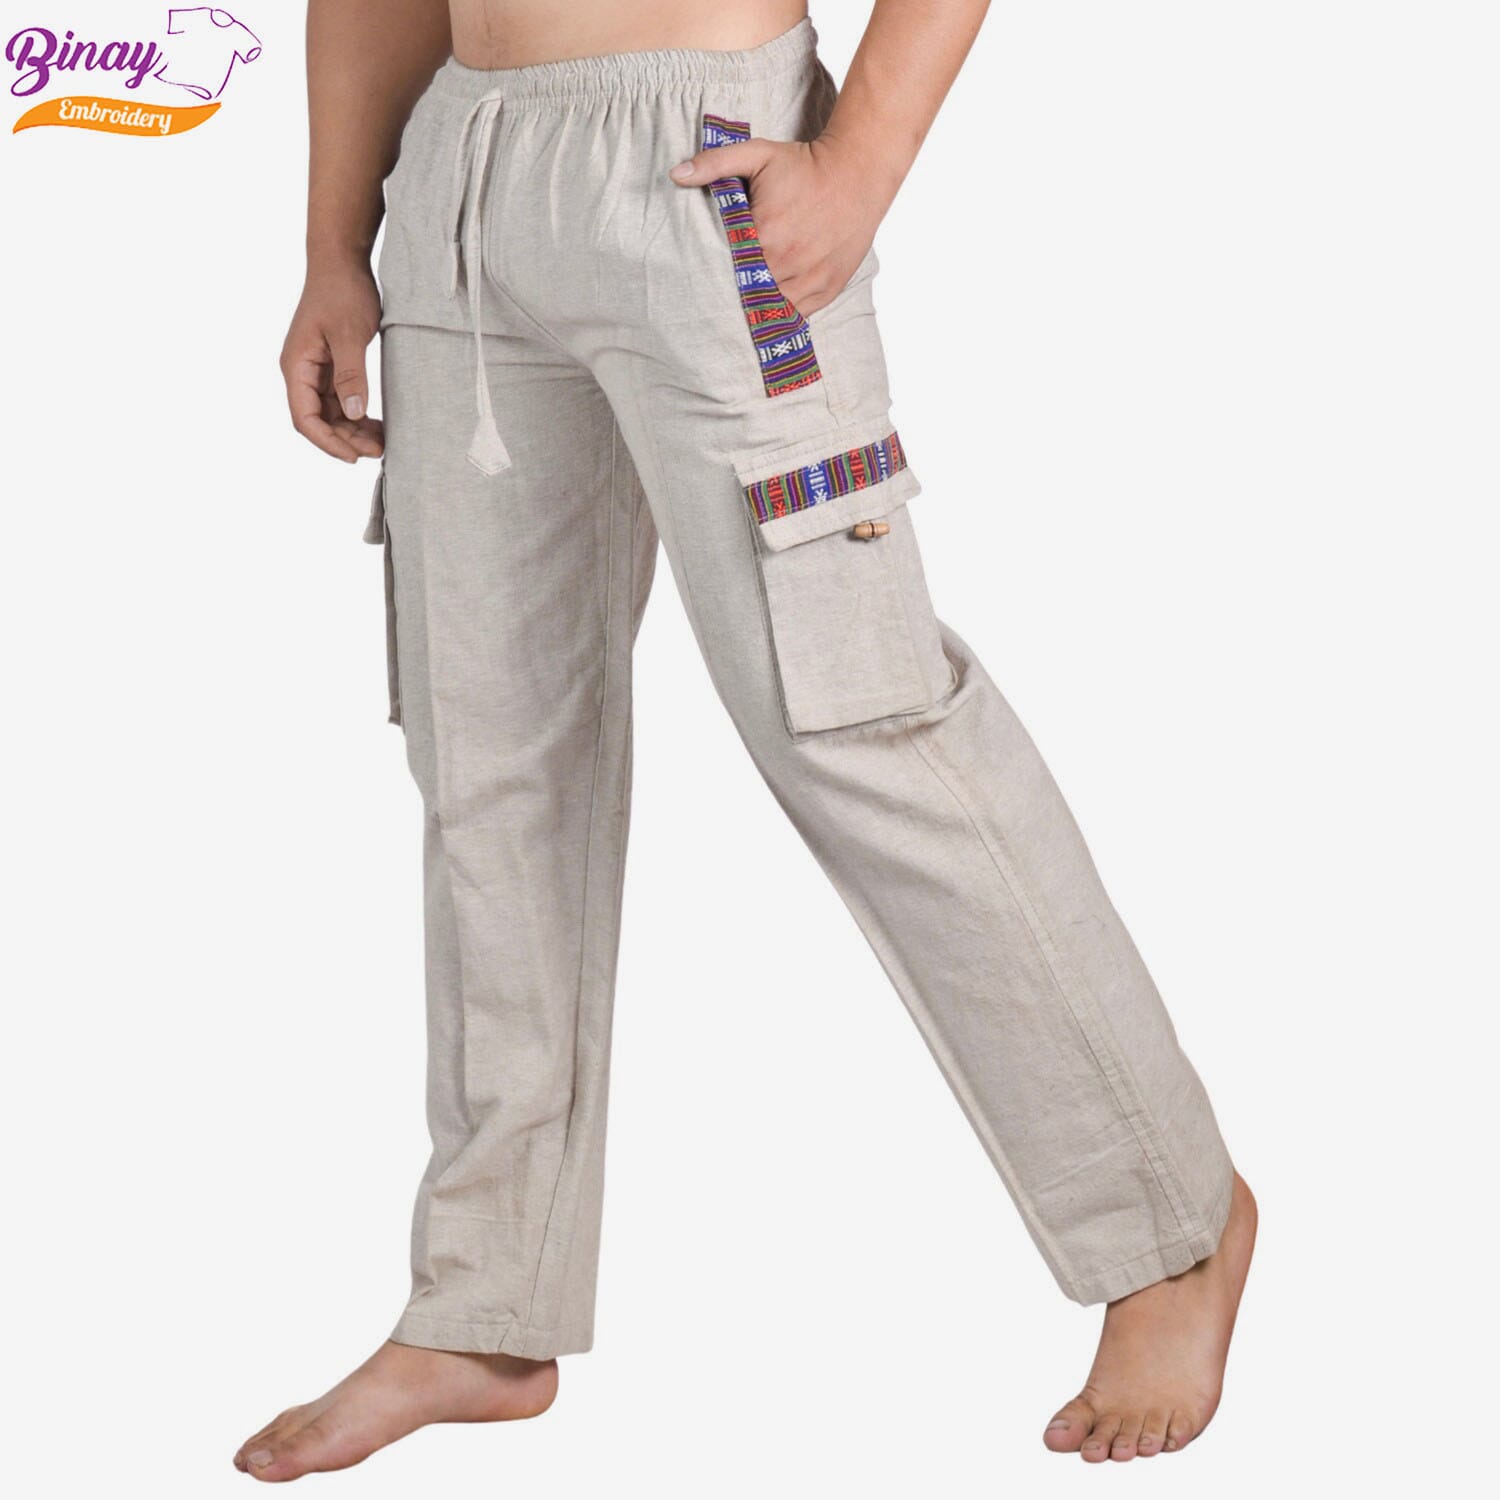 Buy from a wide range of shorts, briefs, trunks, and trousers for your  little ones.